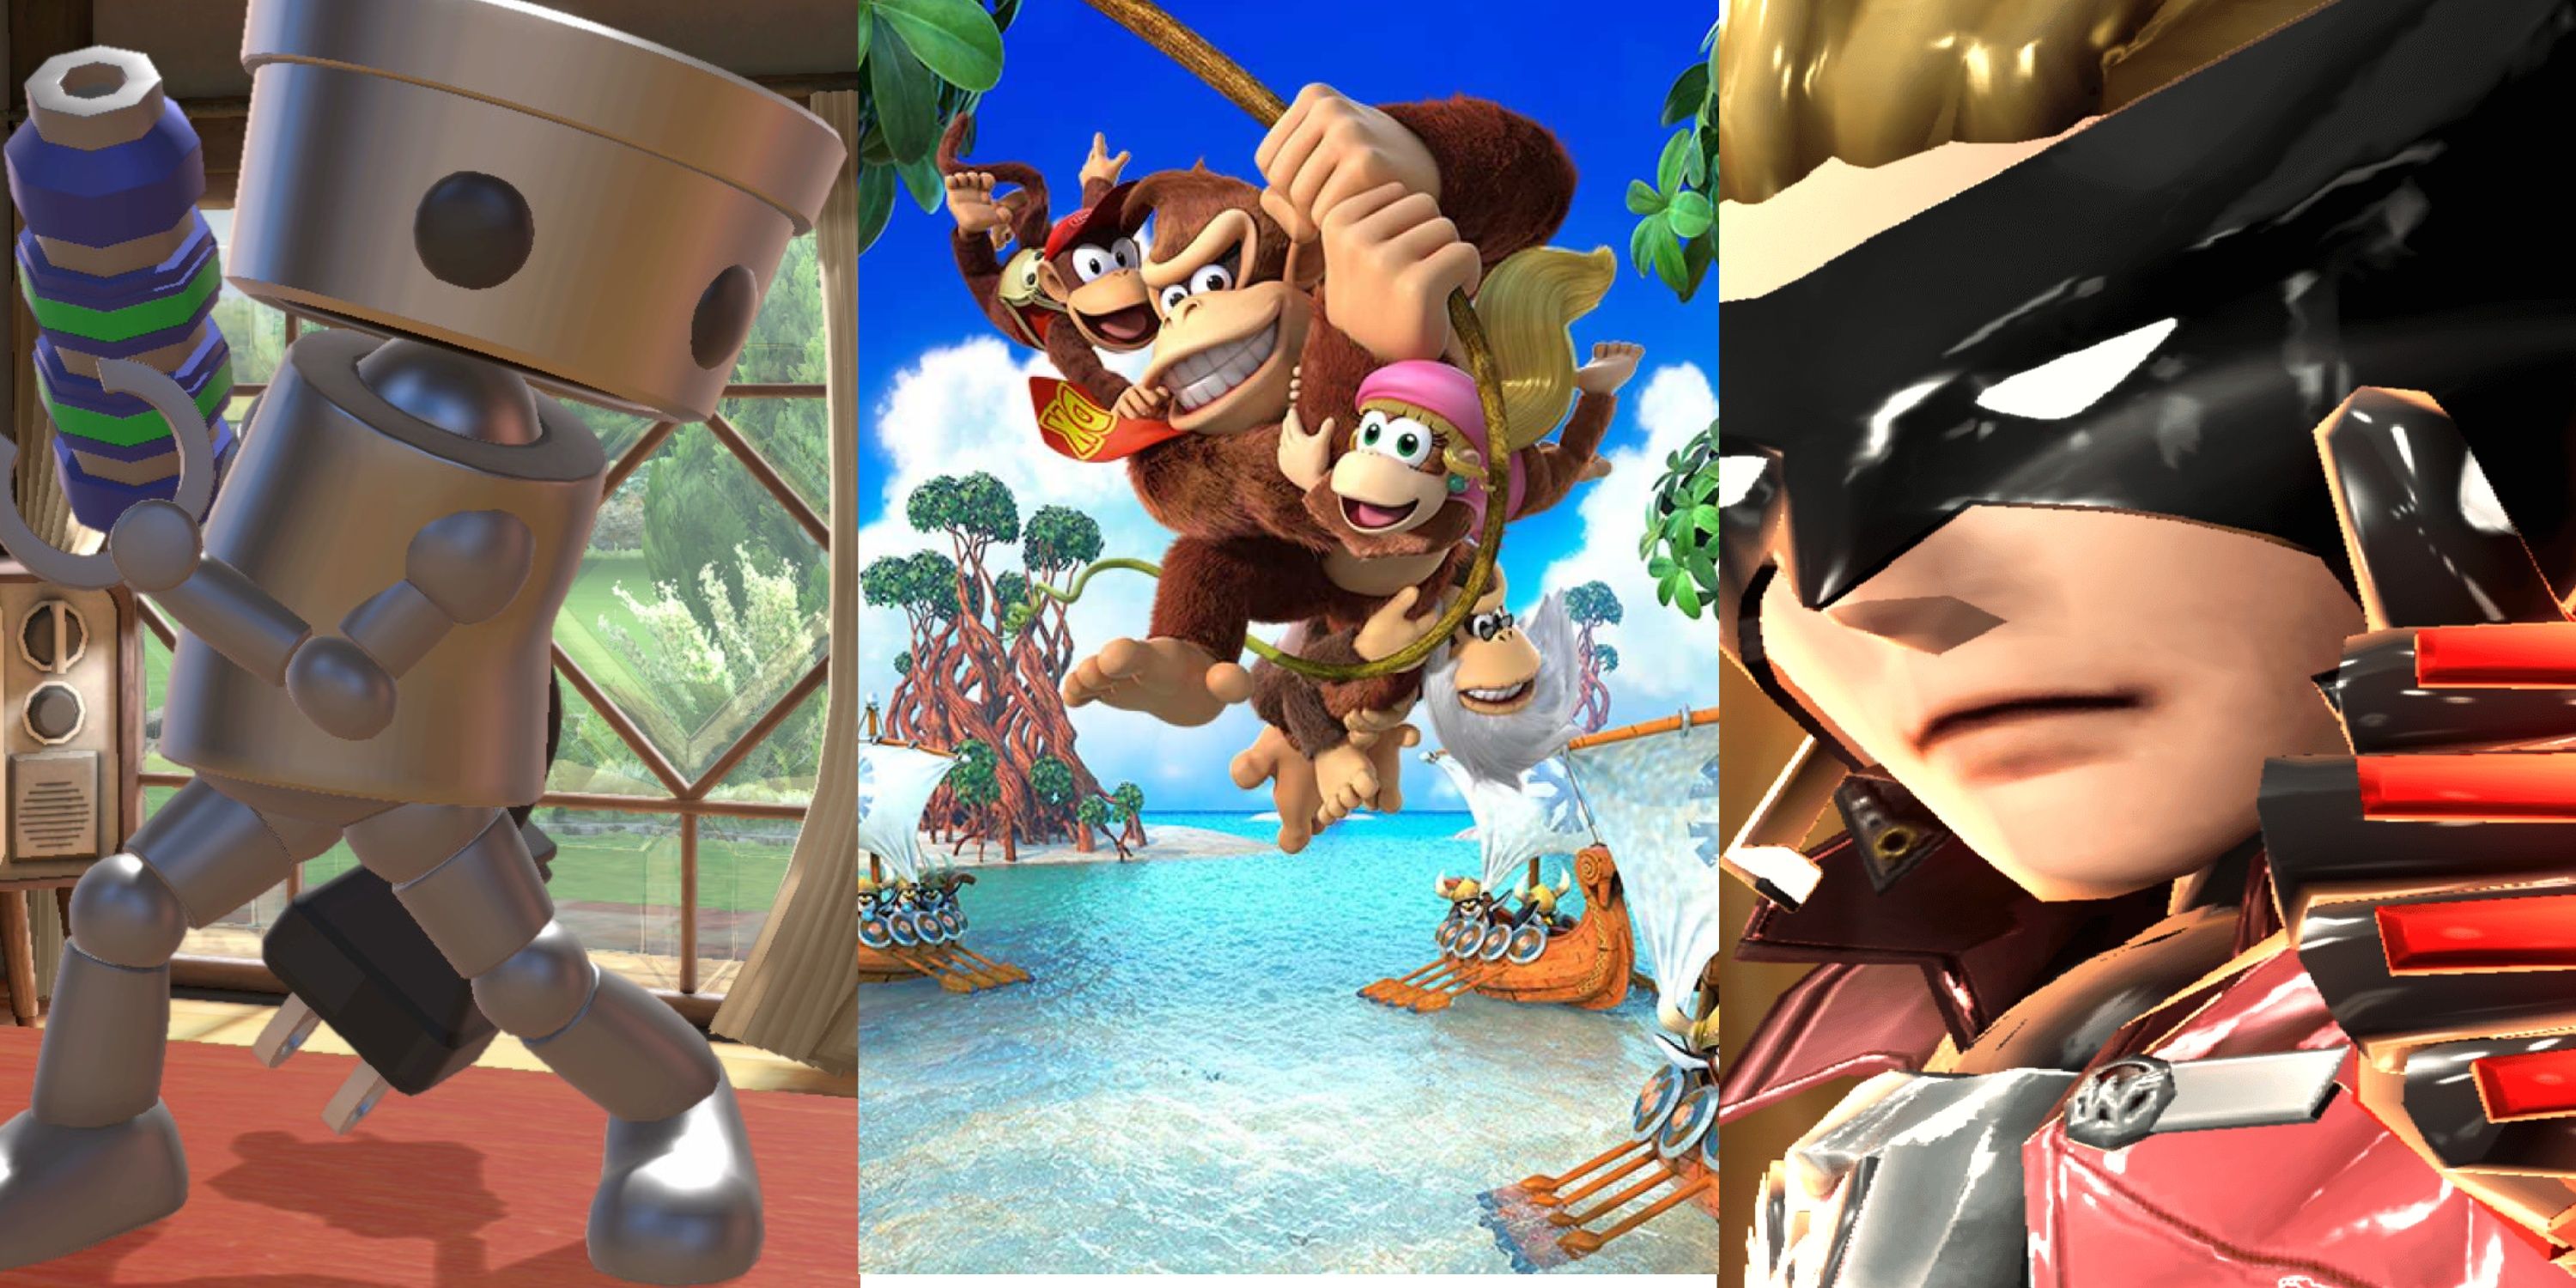 A split image featuring Chibi Robo, The Wonderful 101, and Donkey Kong.